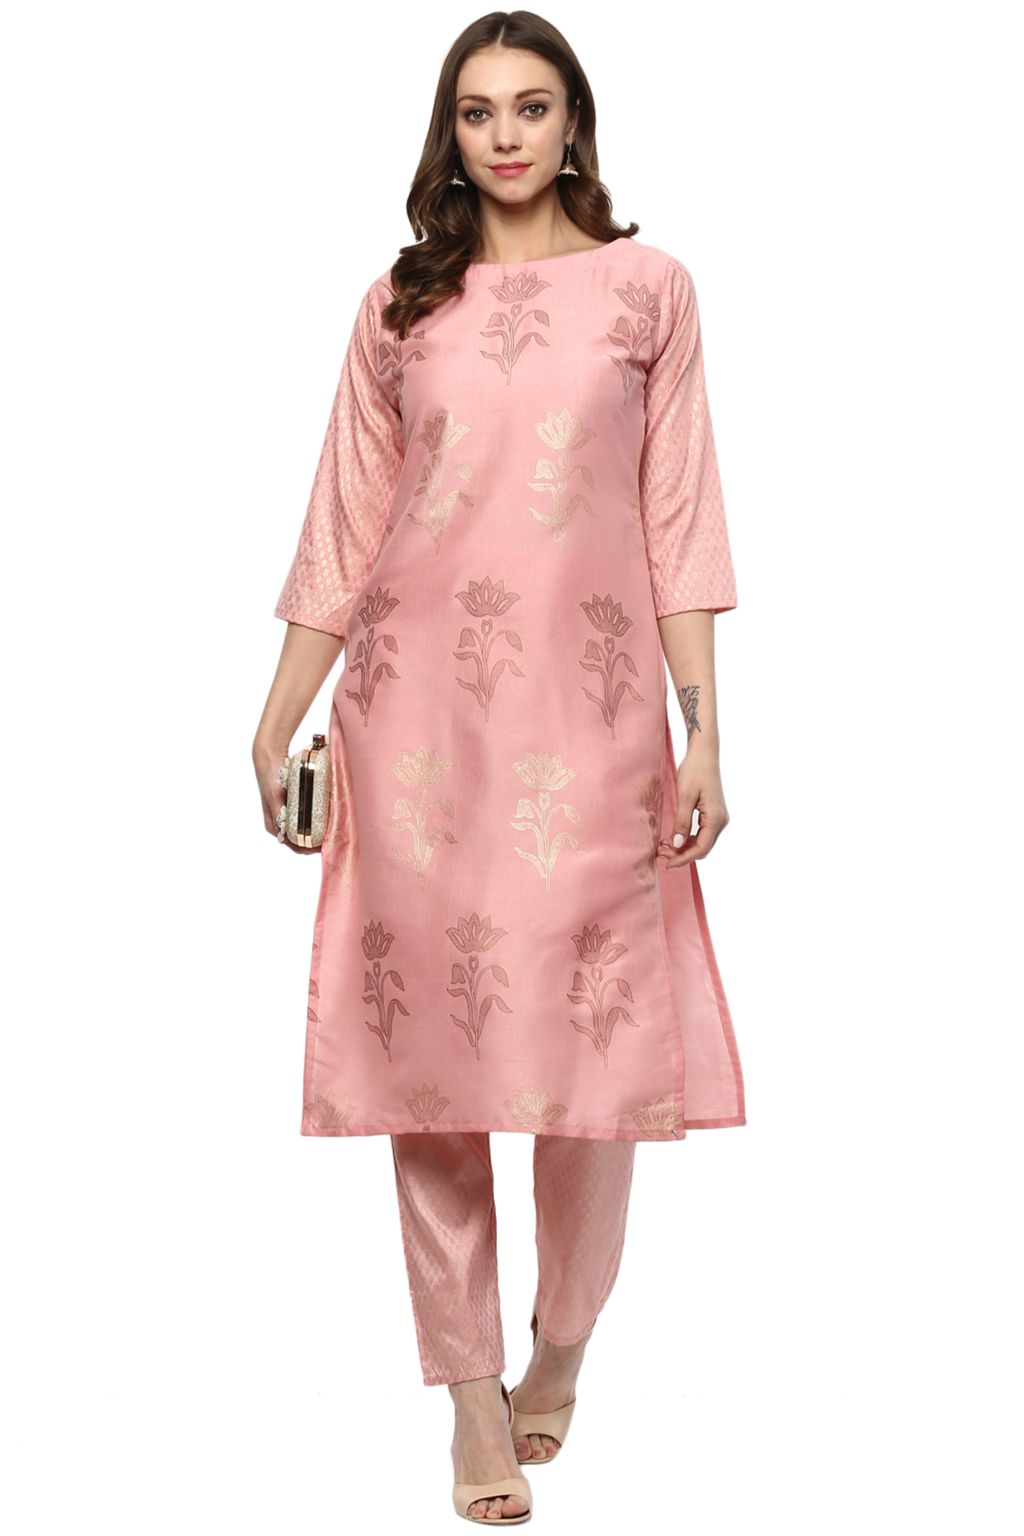 Buy New Elite Rayon Kurti with Pant in Gold Print for Women and Girls  (Yellow, Medium) at Amazon.in